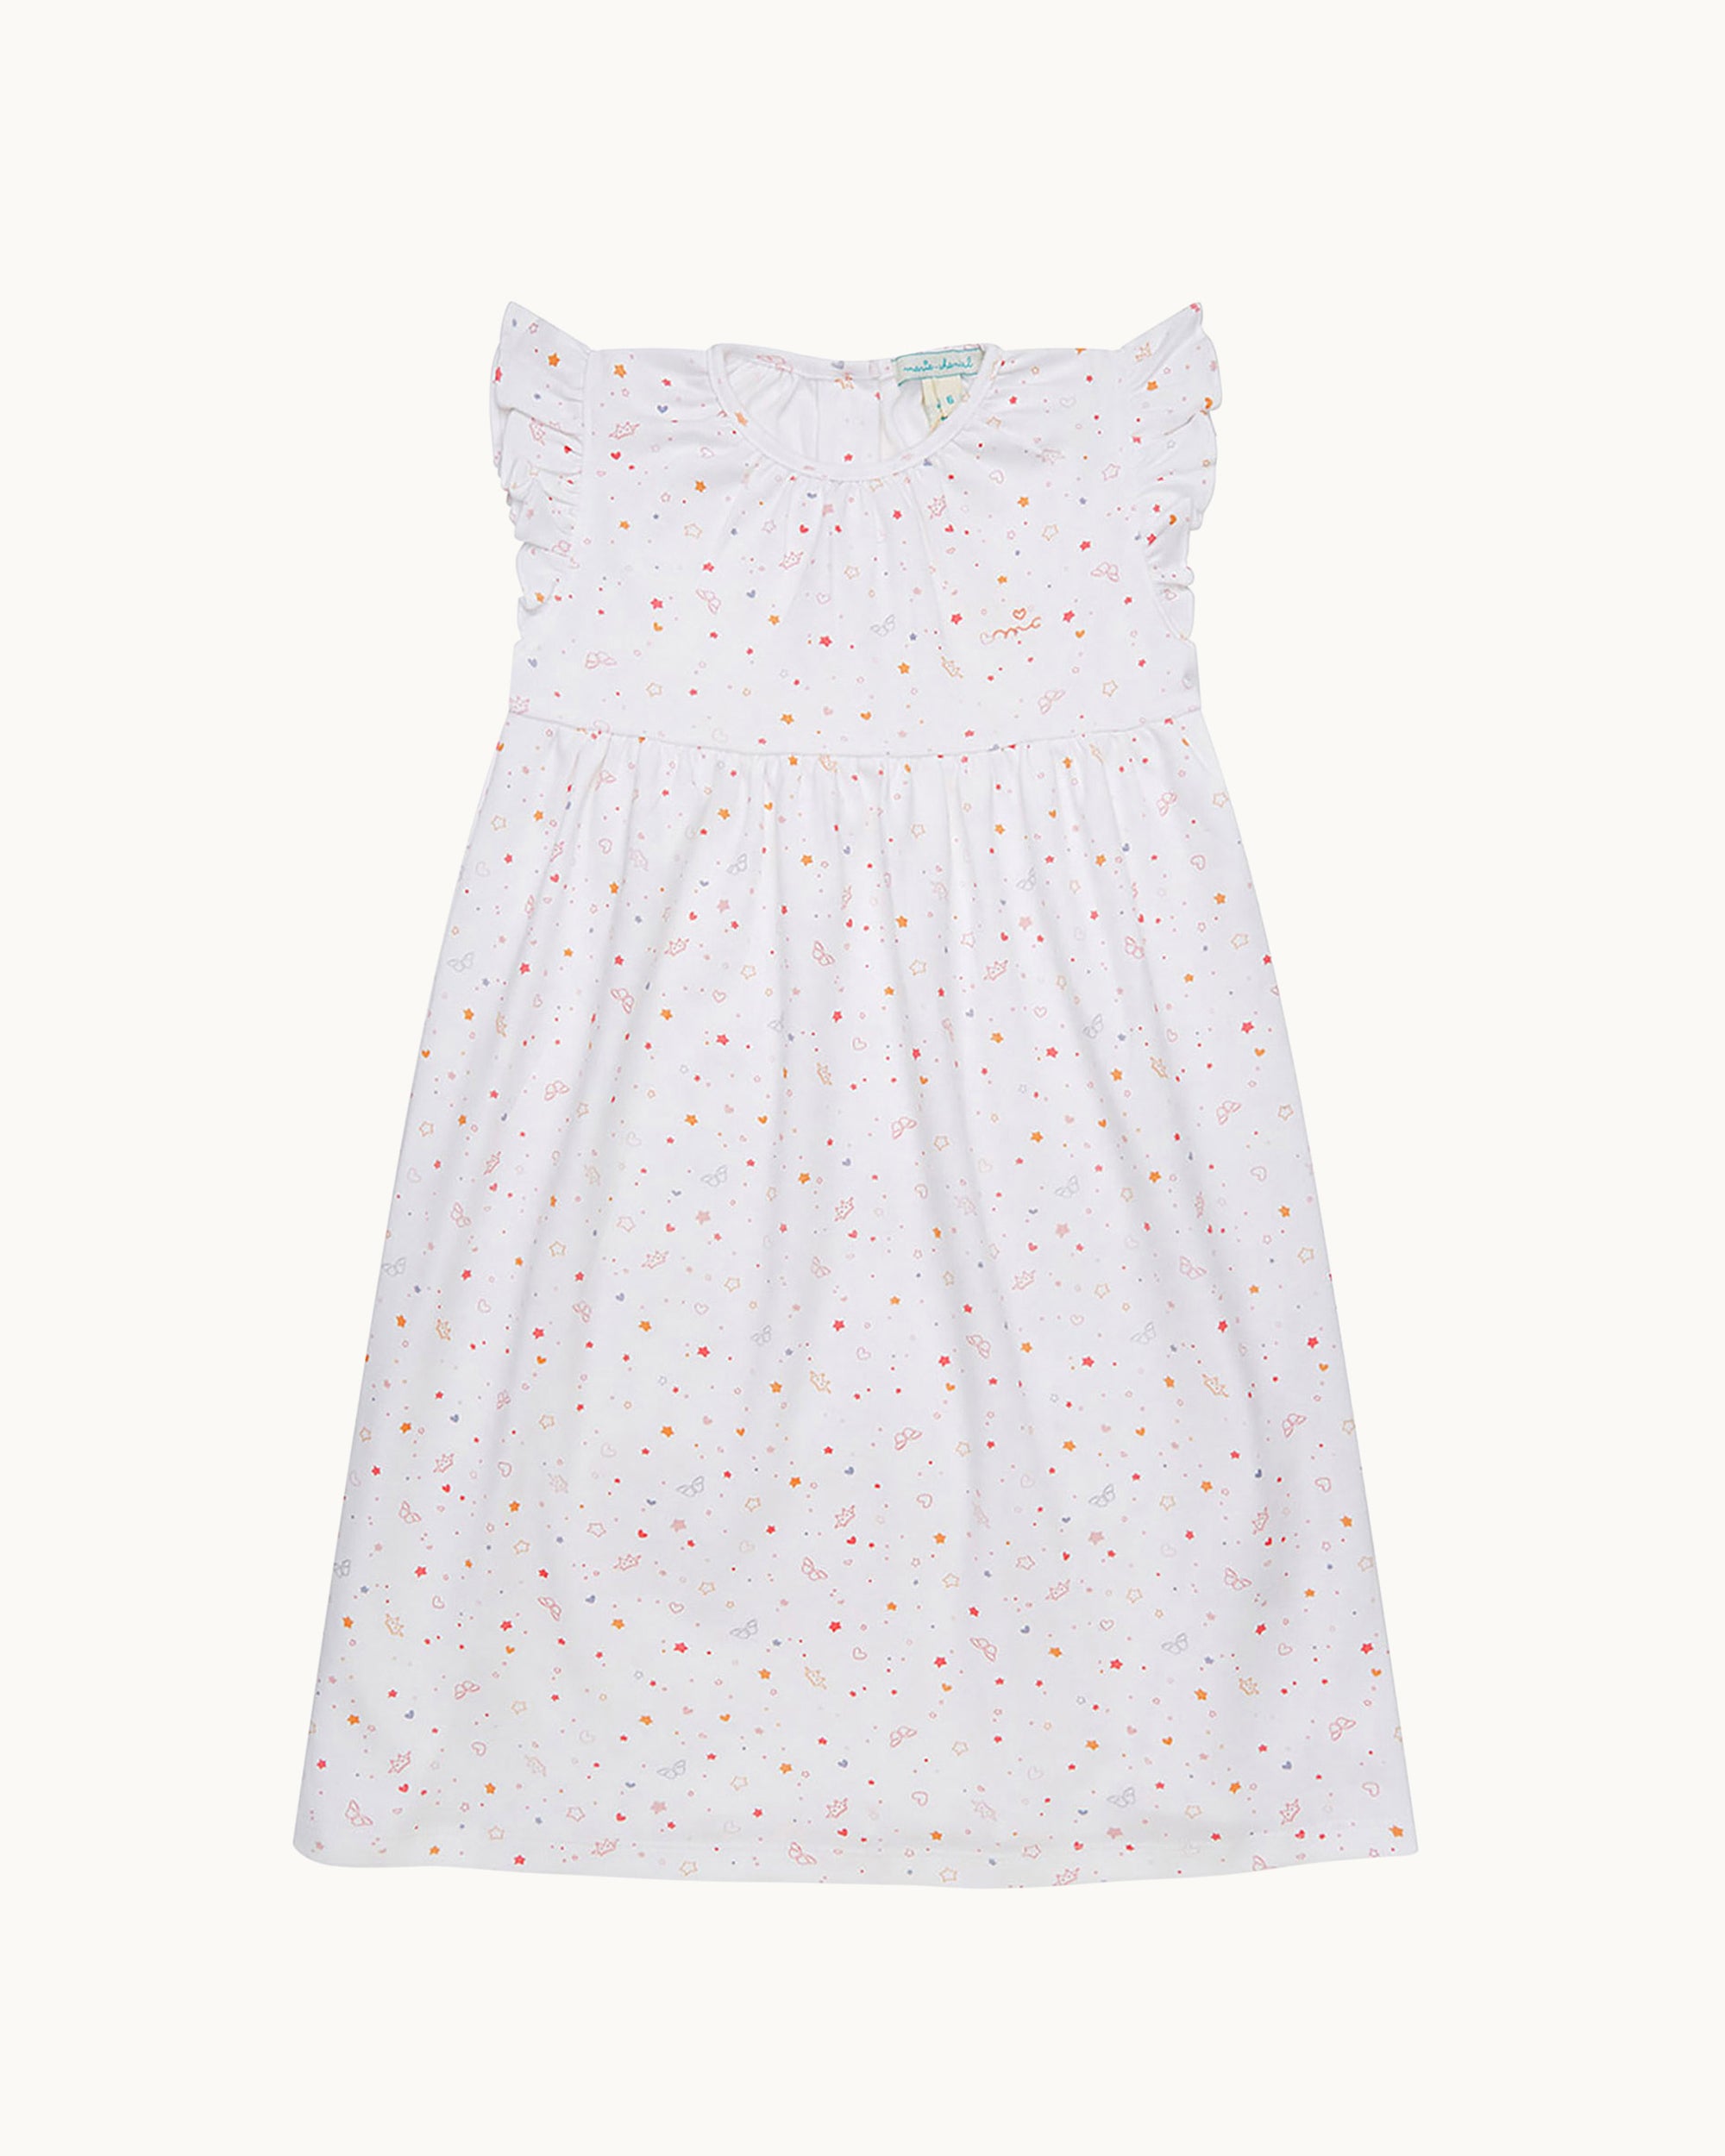 Star & Crown Nightgown - White & Pink